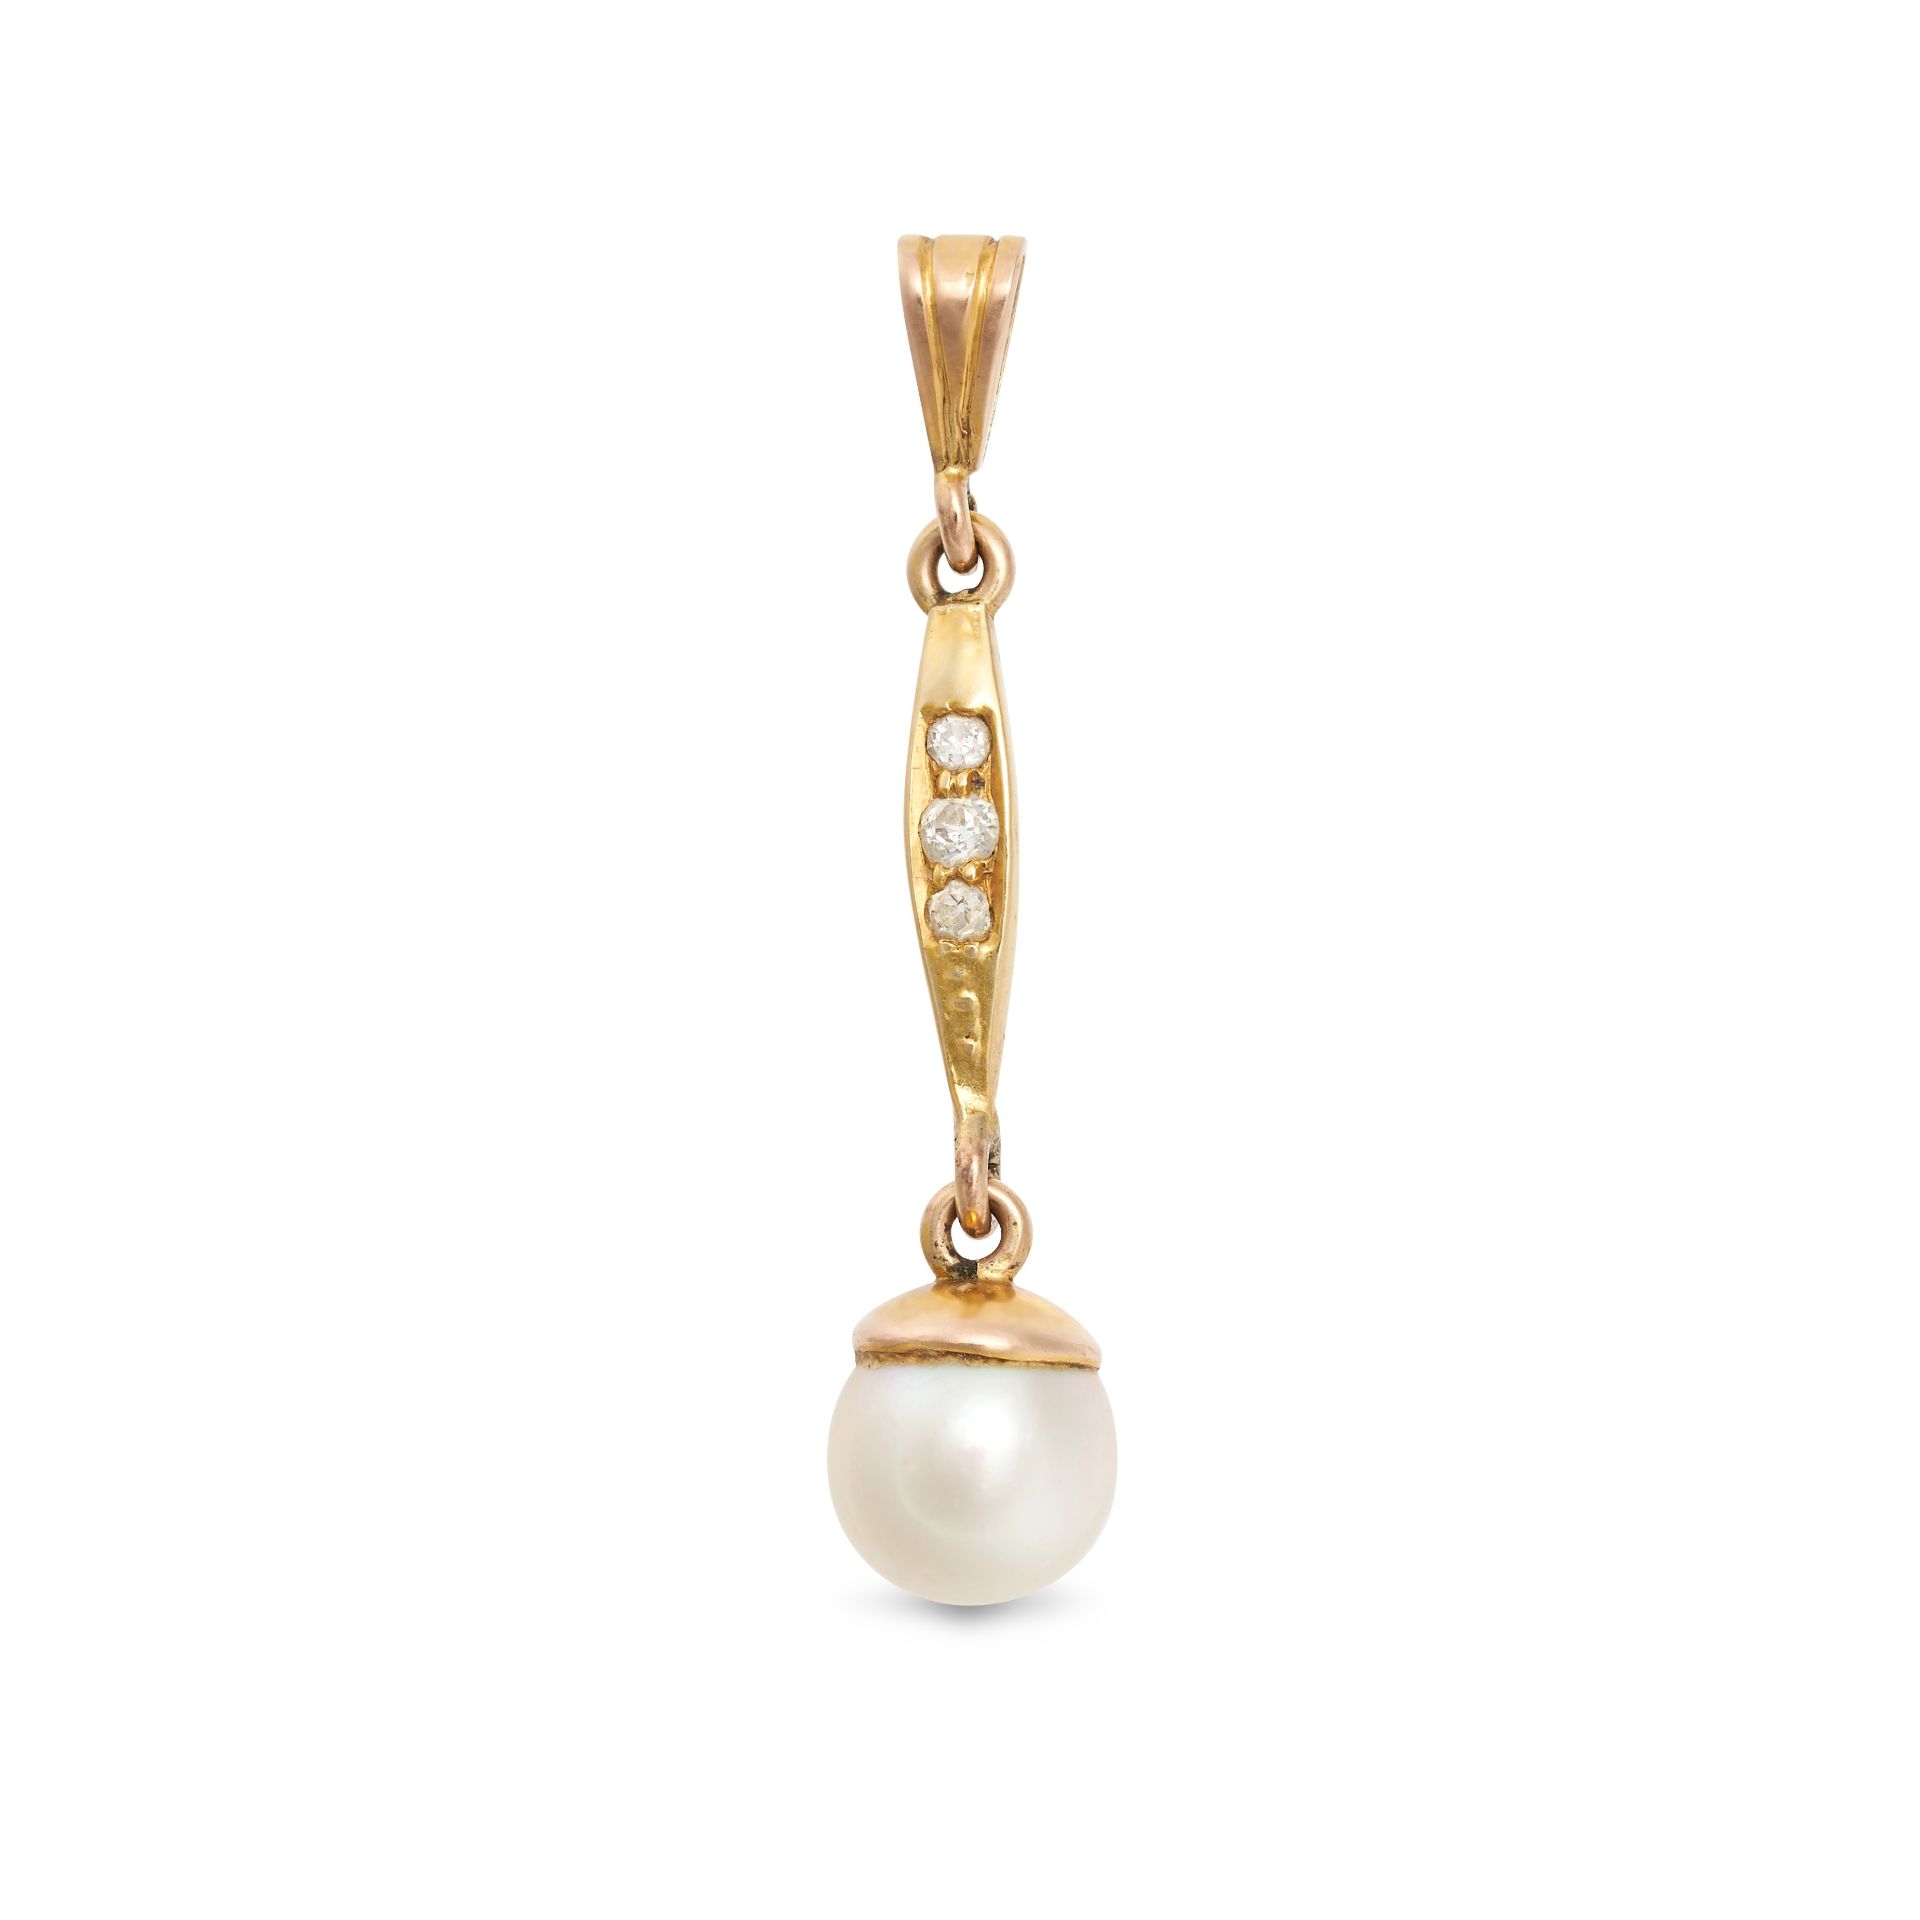 NO RESERVE - A PEARL AND DIAMOND DROP PENDANT in yellow gold, comprising row of old cut diamonds ...